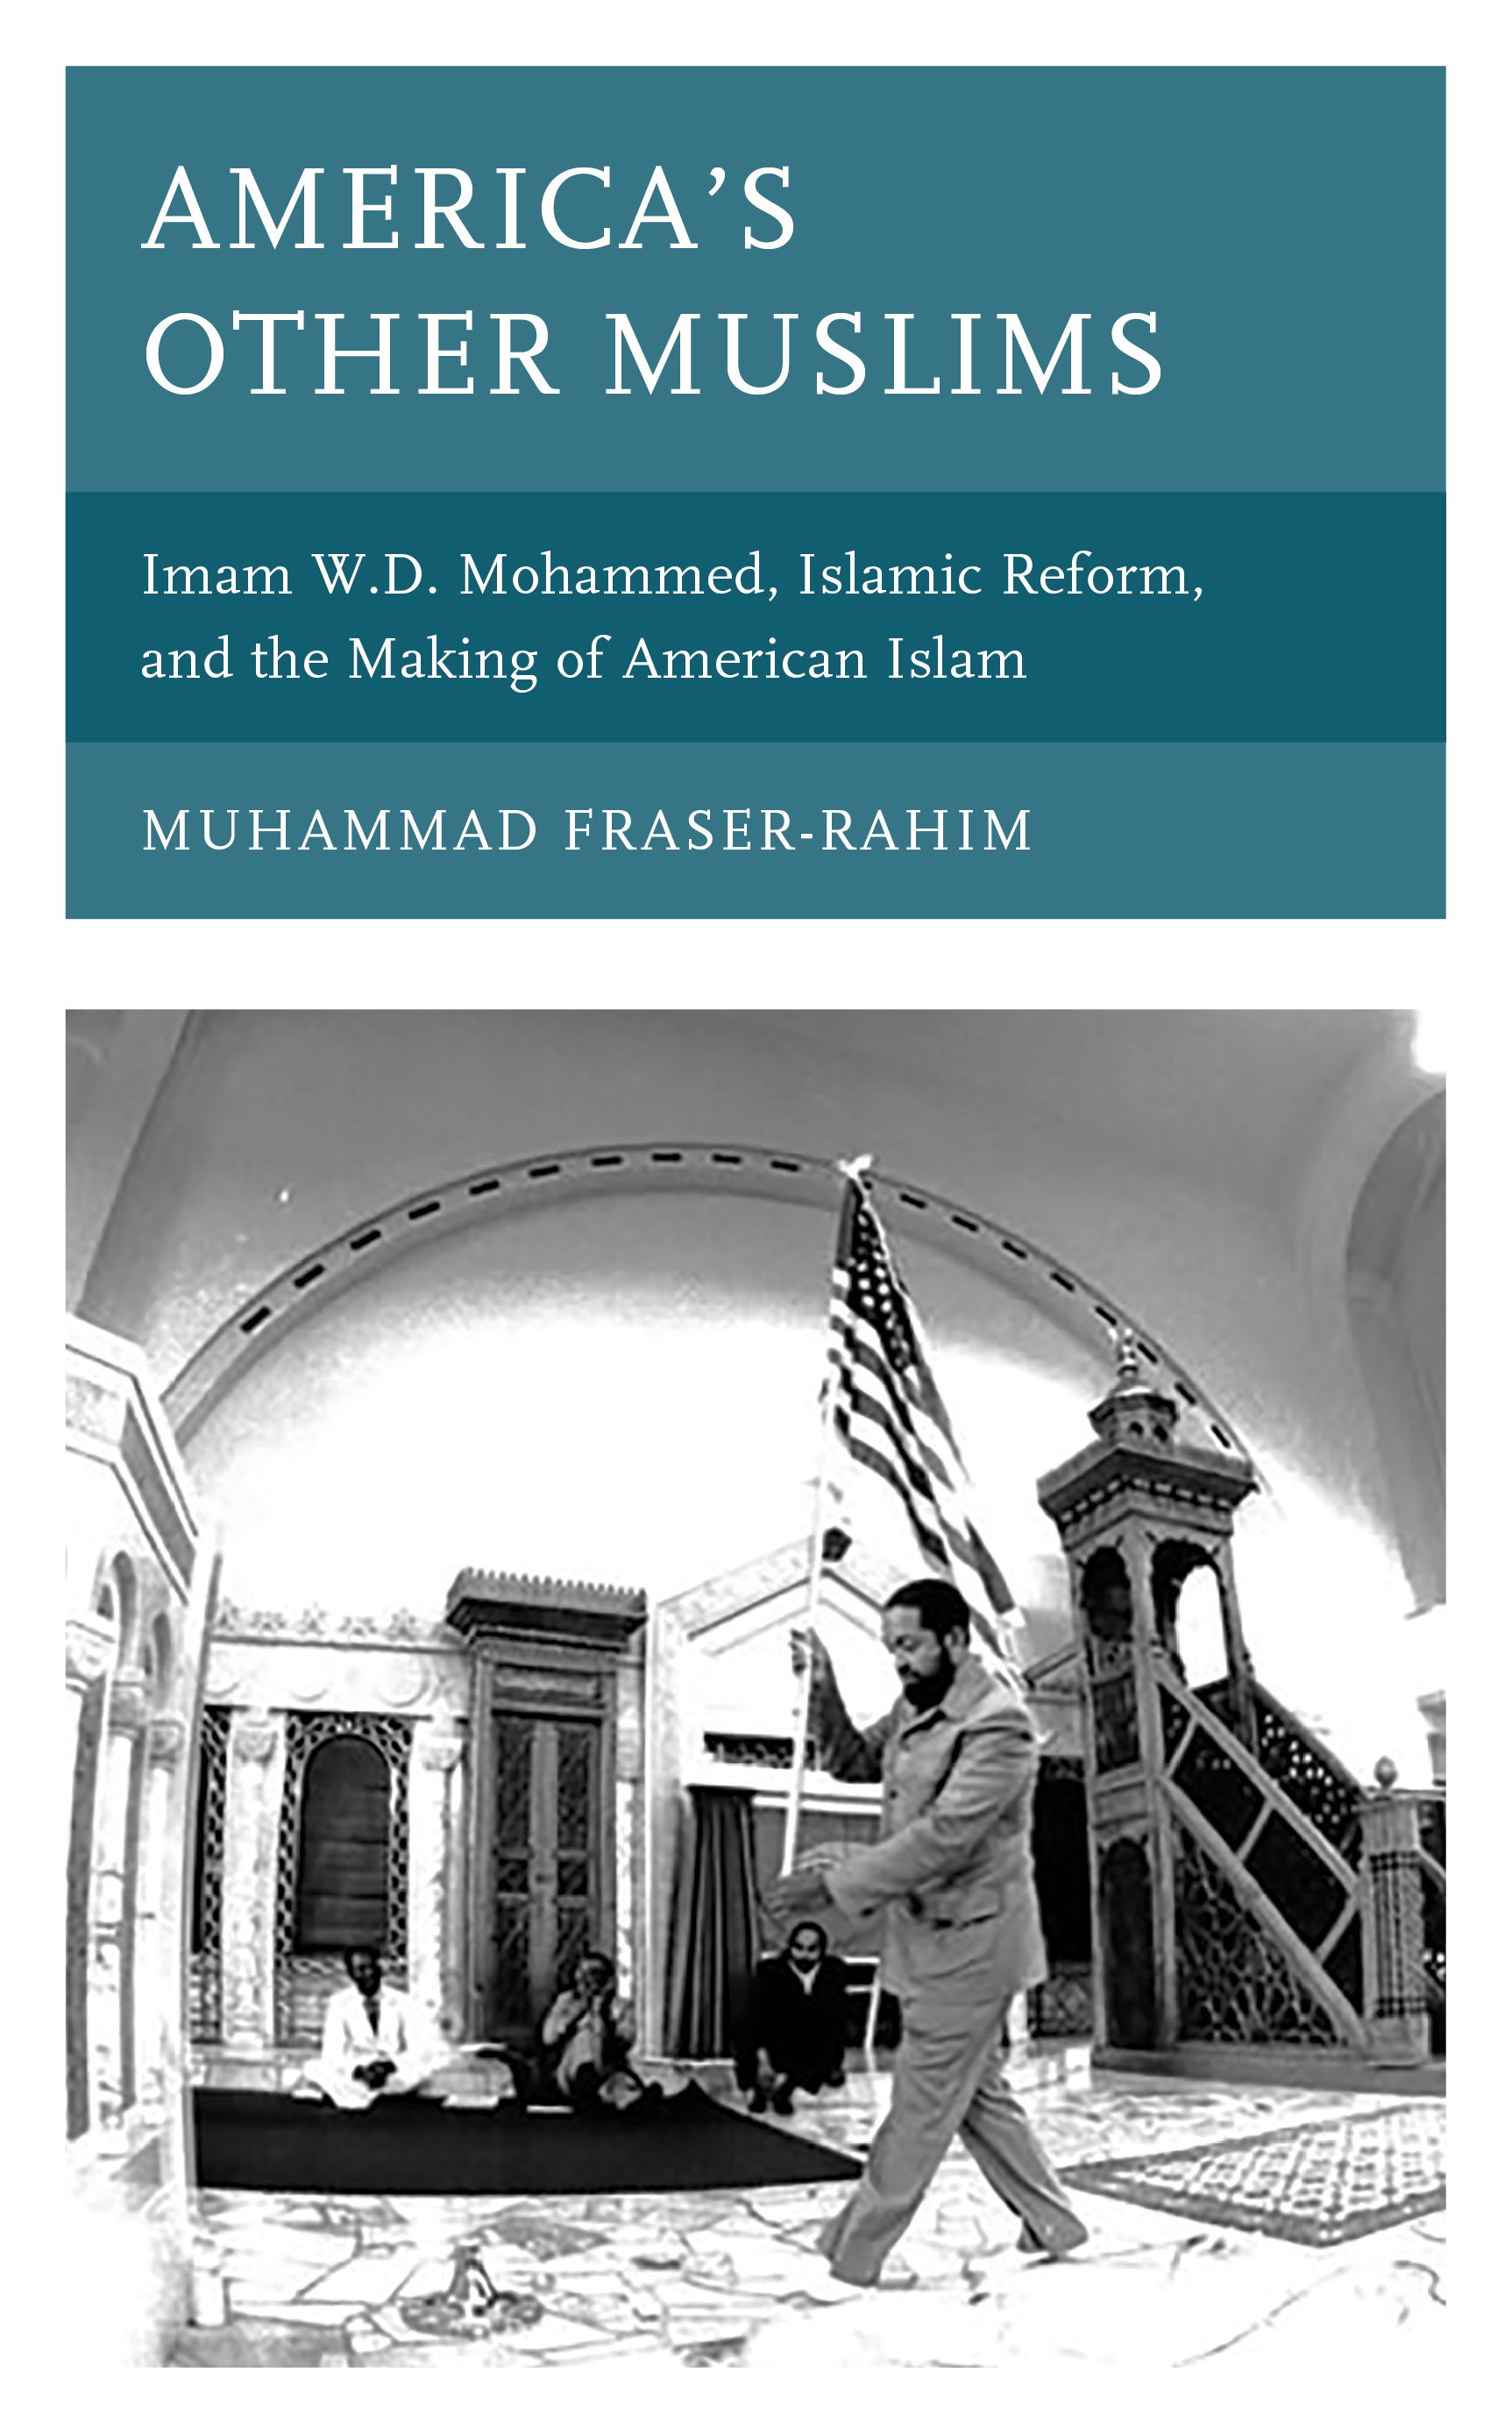 America’s Other Muslims: Imam W.D. Mohammed, Islamic Reform, and the Making of American Islam